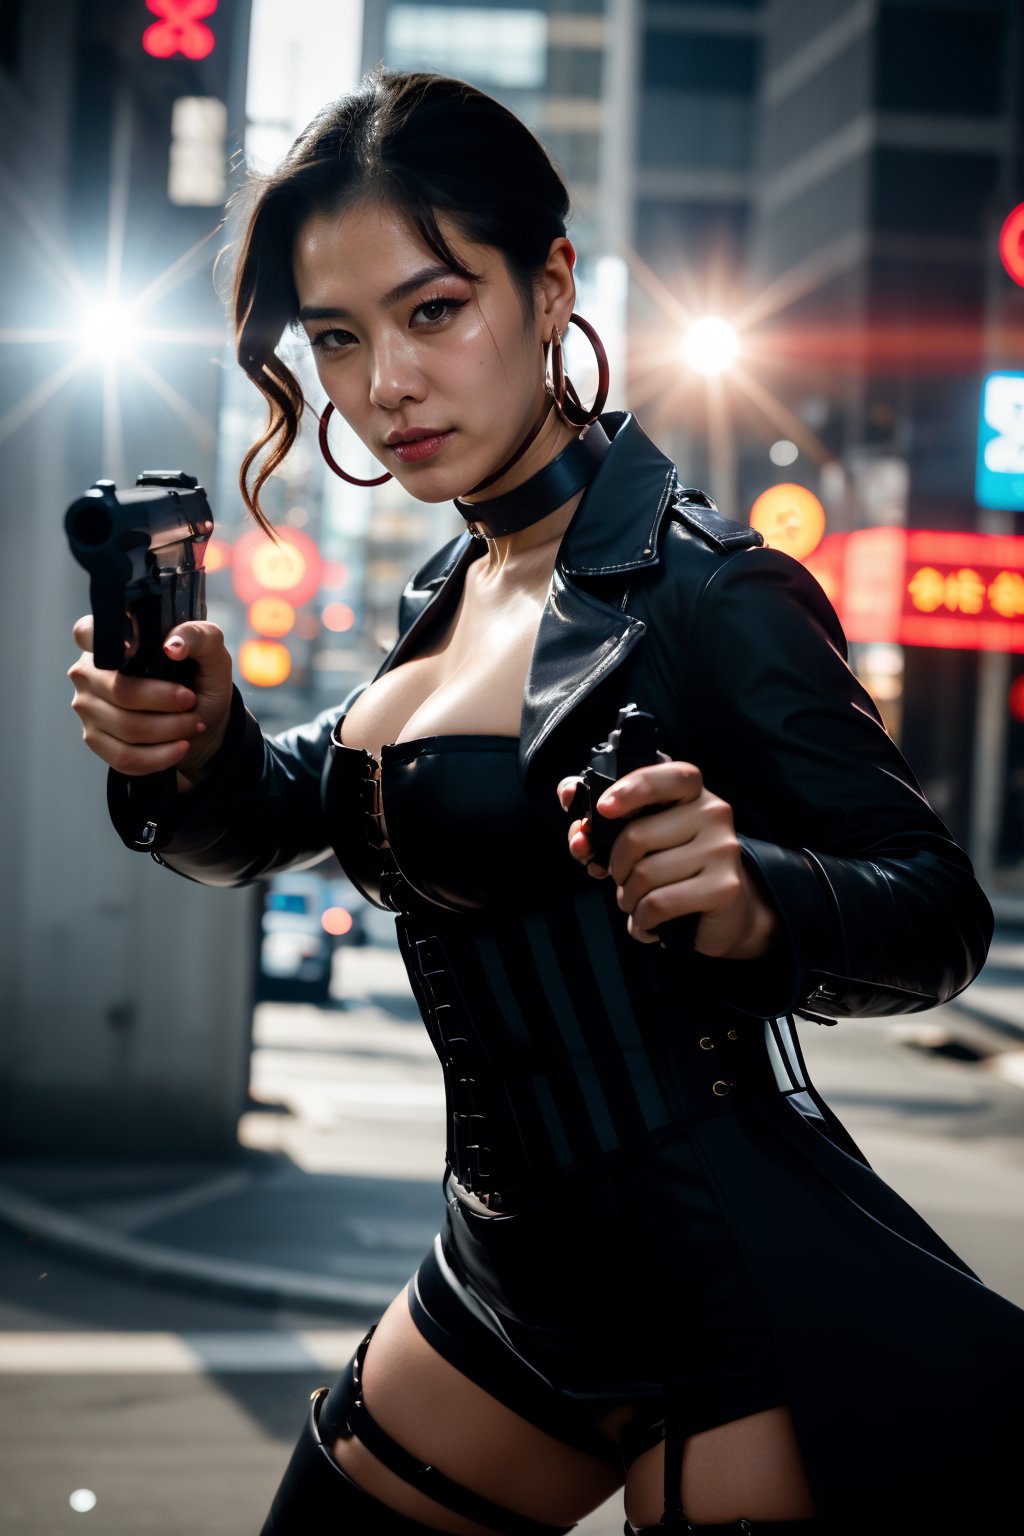 beautiful Asian Claramorningstar, latex choker, leather jacket trenchcoat, stripe corset, updo hair, confident, hoop earrings, holding a xuer pistol, cinematic lightning, action pose, weapon, lens flare, portrait